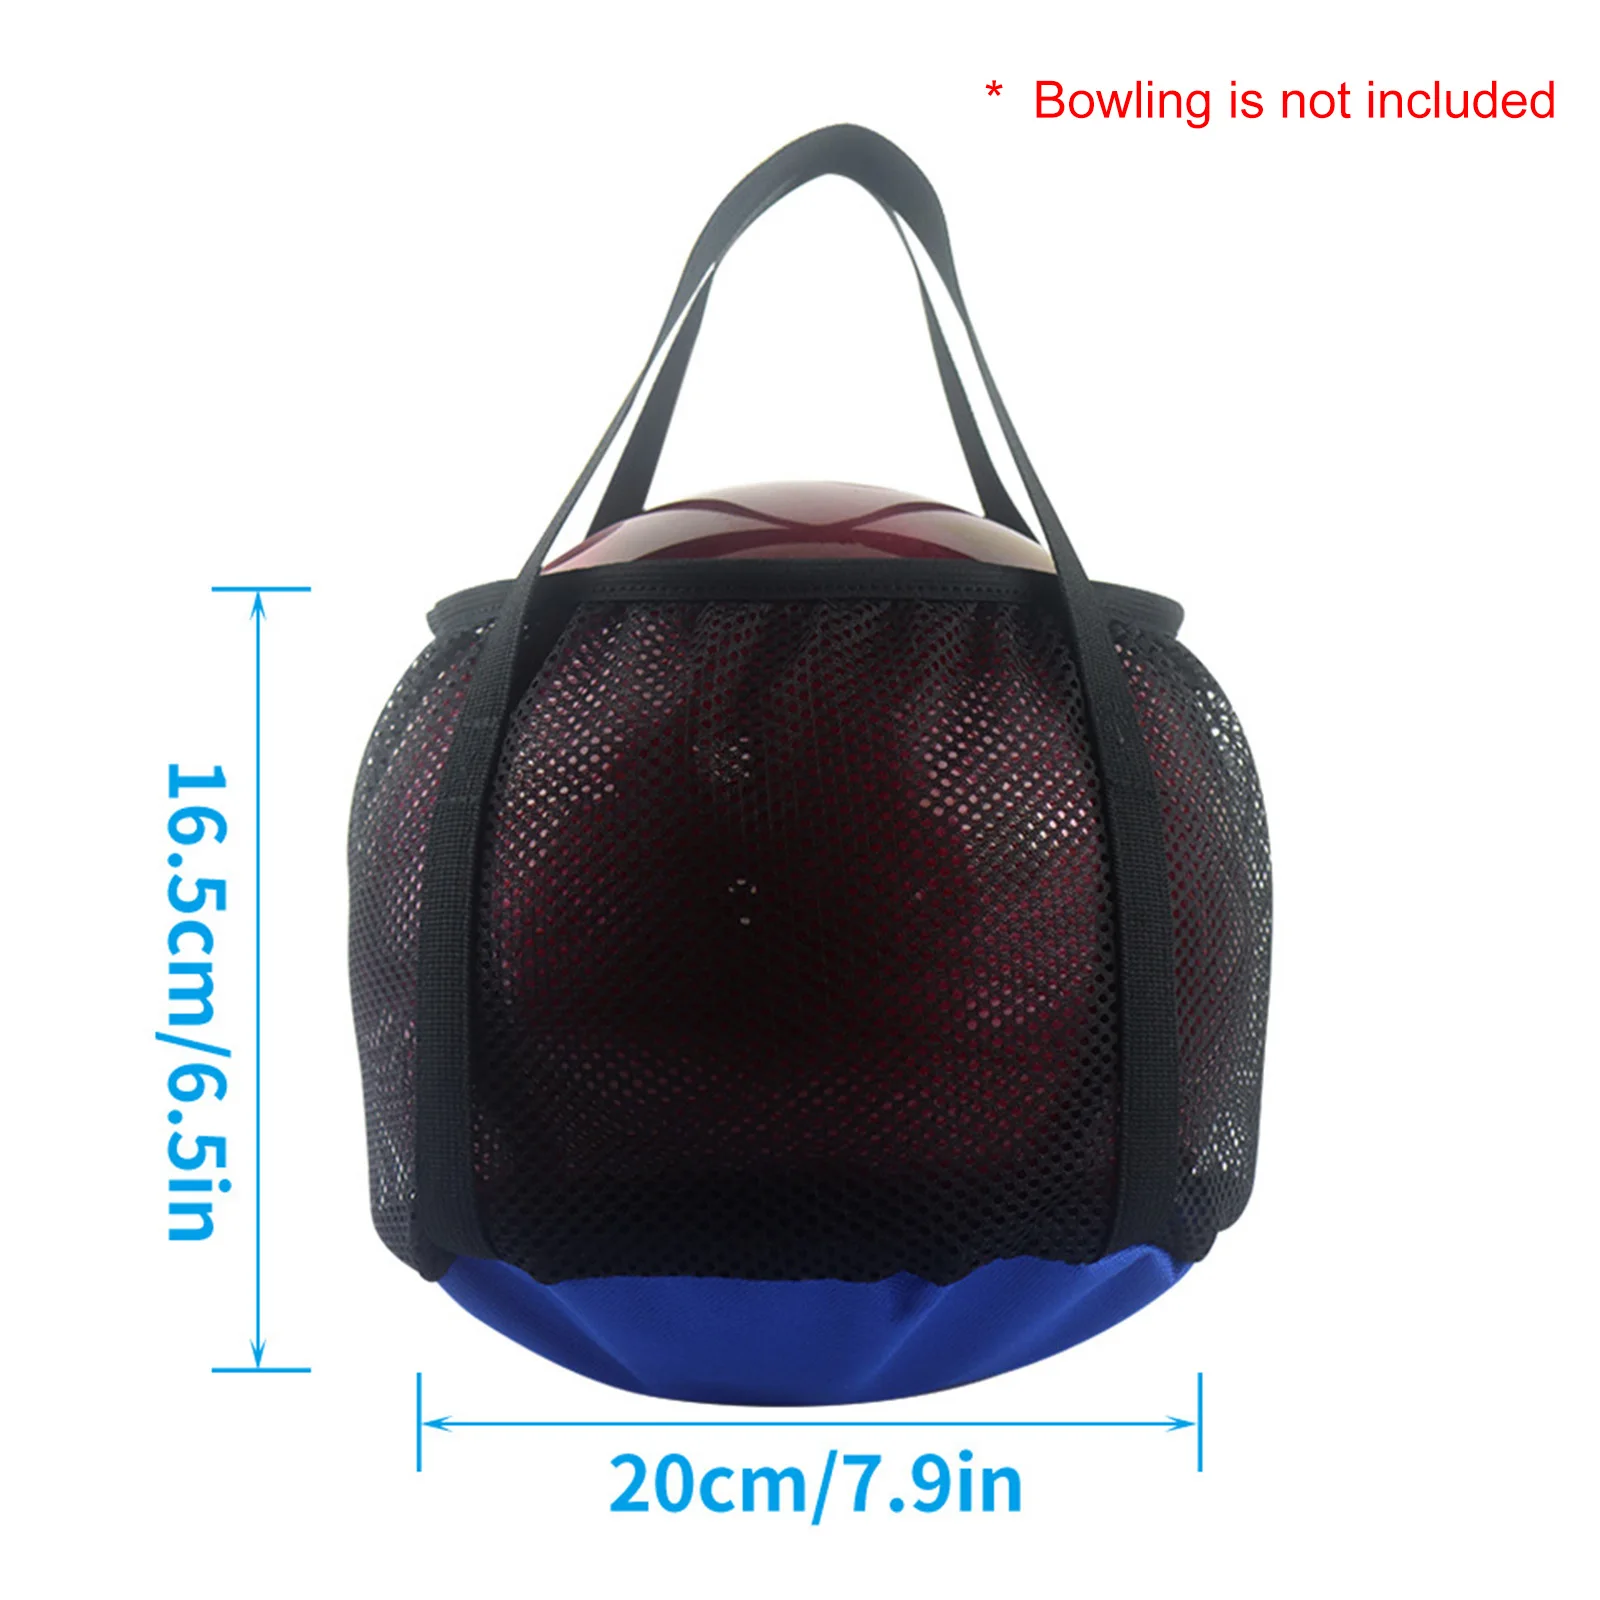 

Single Bowling Tote Bag Men'S Sports Bowling Ball Bag Practical Bowling Accessories With Handle Elastic Cord Closure Tools